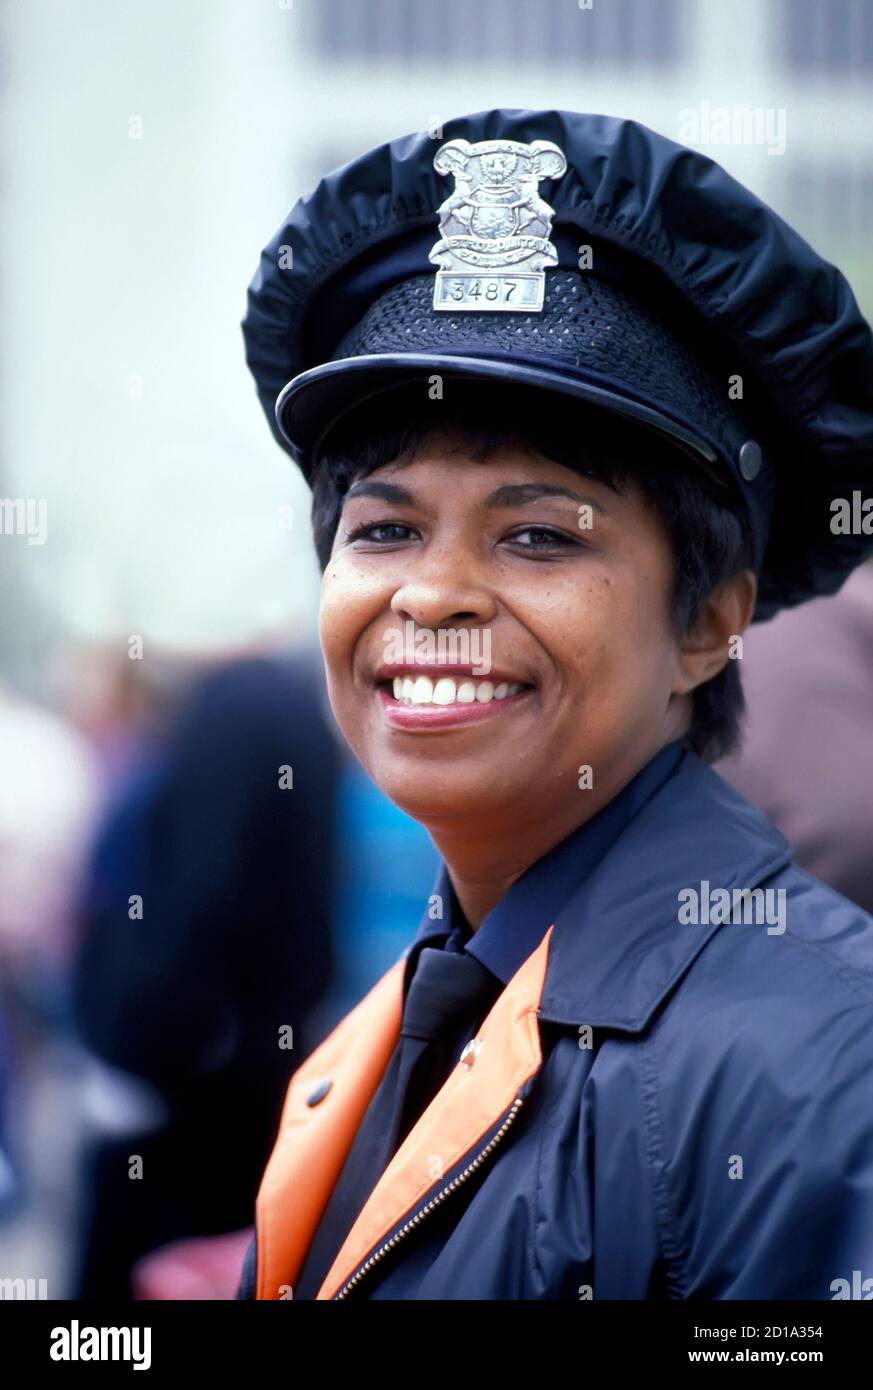 Portrait of a black female police officer while on duty Stock Photo